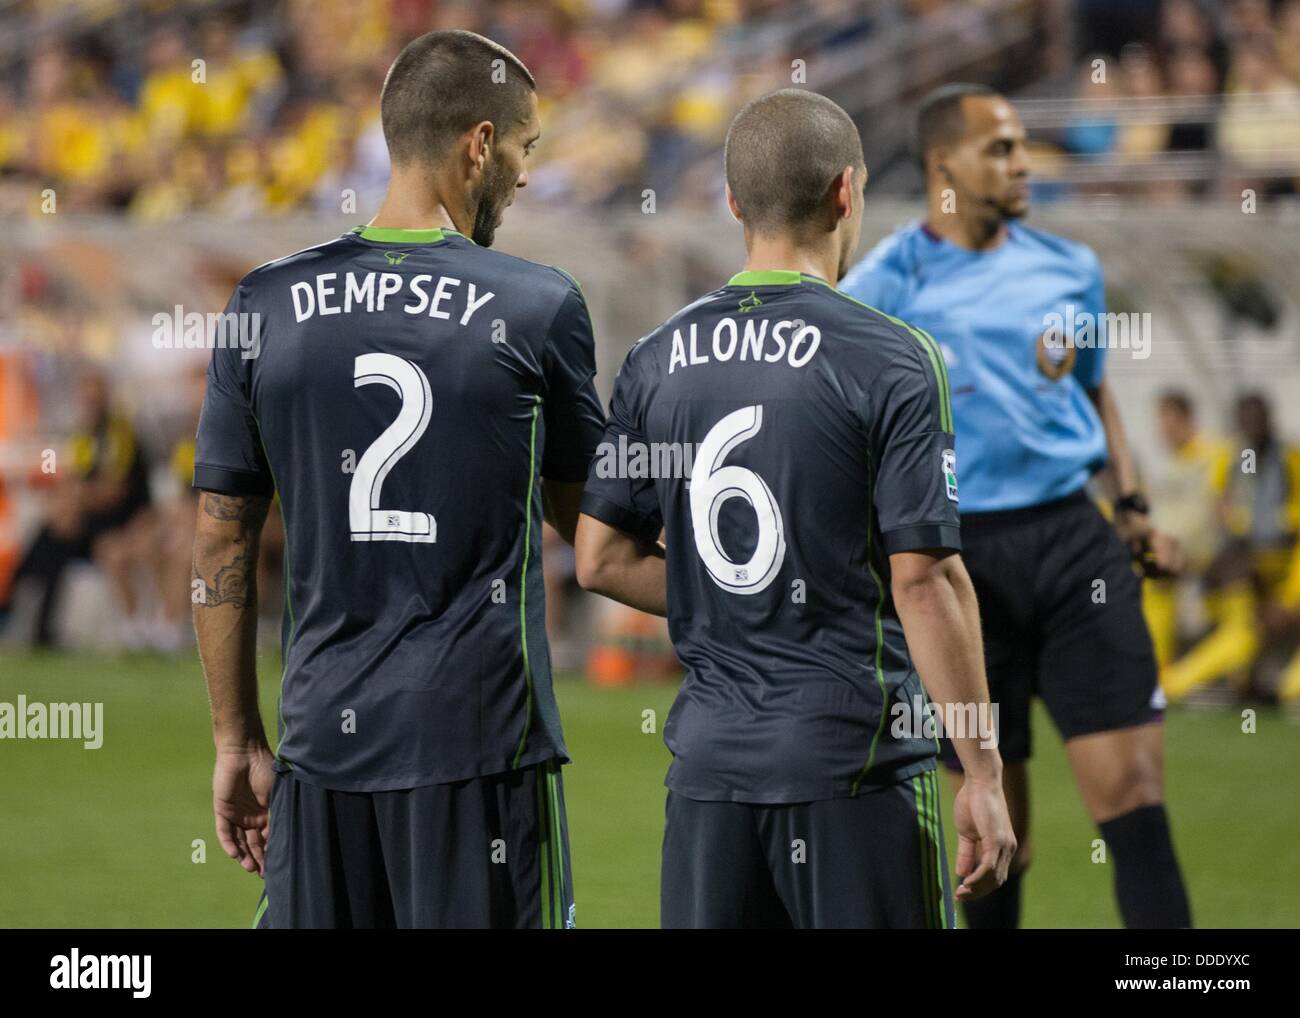 Aug. 31, 2013 - Columbus, Ohio, United States of America - August 31, 2013: Seattle Sounders FC forward Clint Dempsey (2) and teammate Seattle Sounders FC midfielder Osvaldo Alonso (6) during the Major League Soccer match between the Seattle Sounders FC and the Columbus Crew at Columbus Crew Stadium in Columbus, OH. The Seattle Sounders FC defeated the Columbus Crew 1-0. Stock Photo